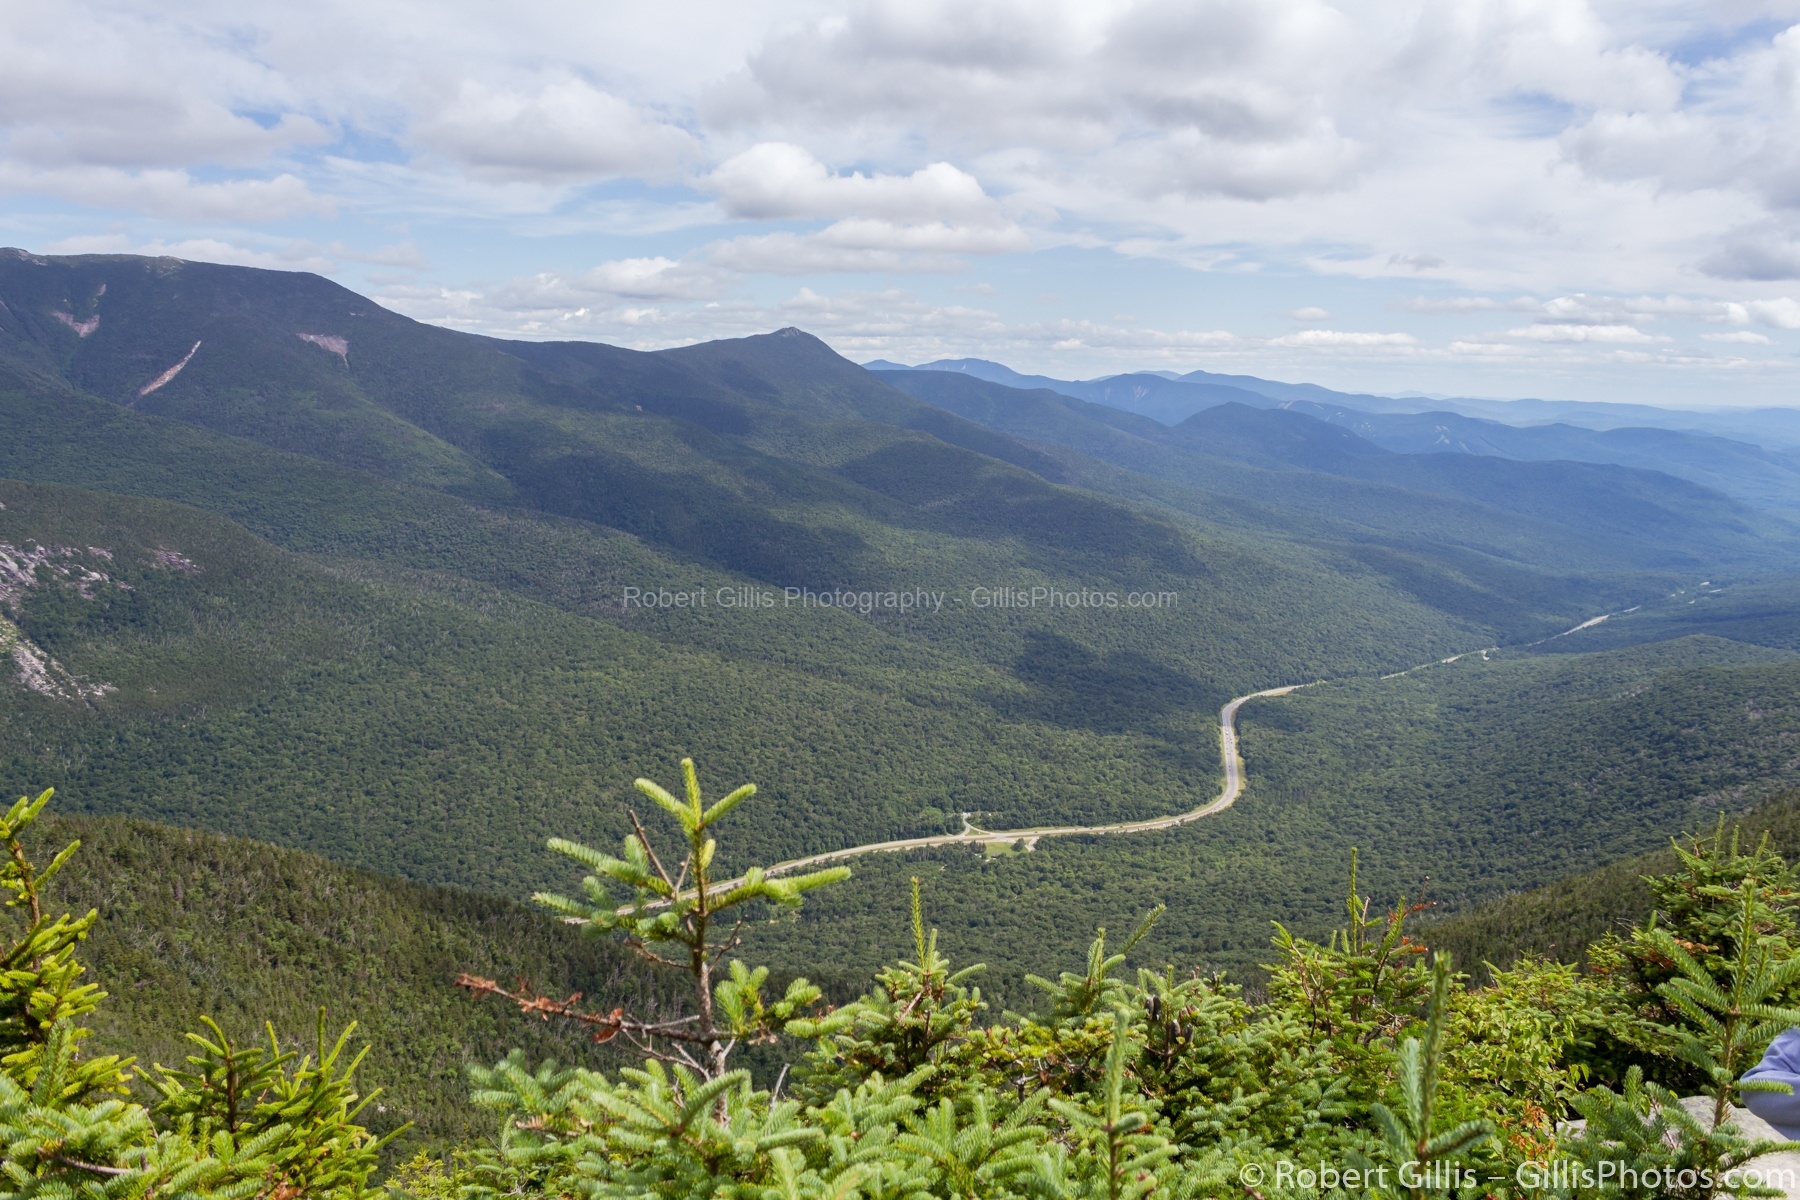 19-Franconia-Cannon-Mountain-Summit-Franconia-Notch-Route-93-Highway